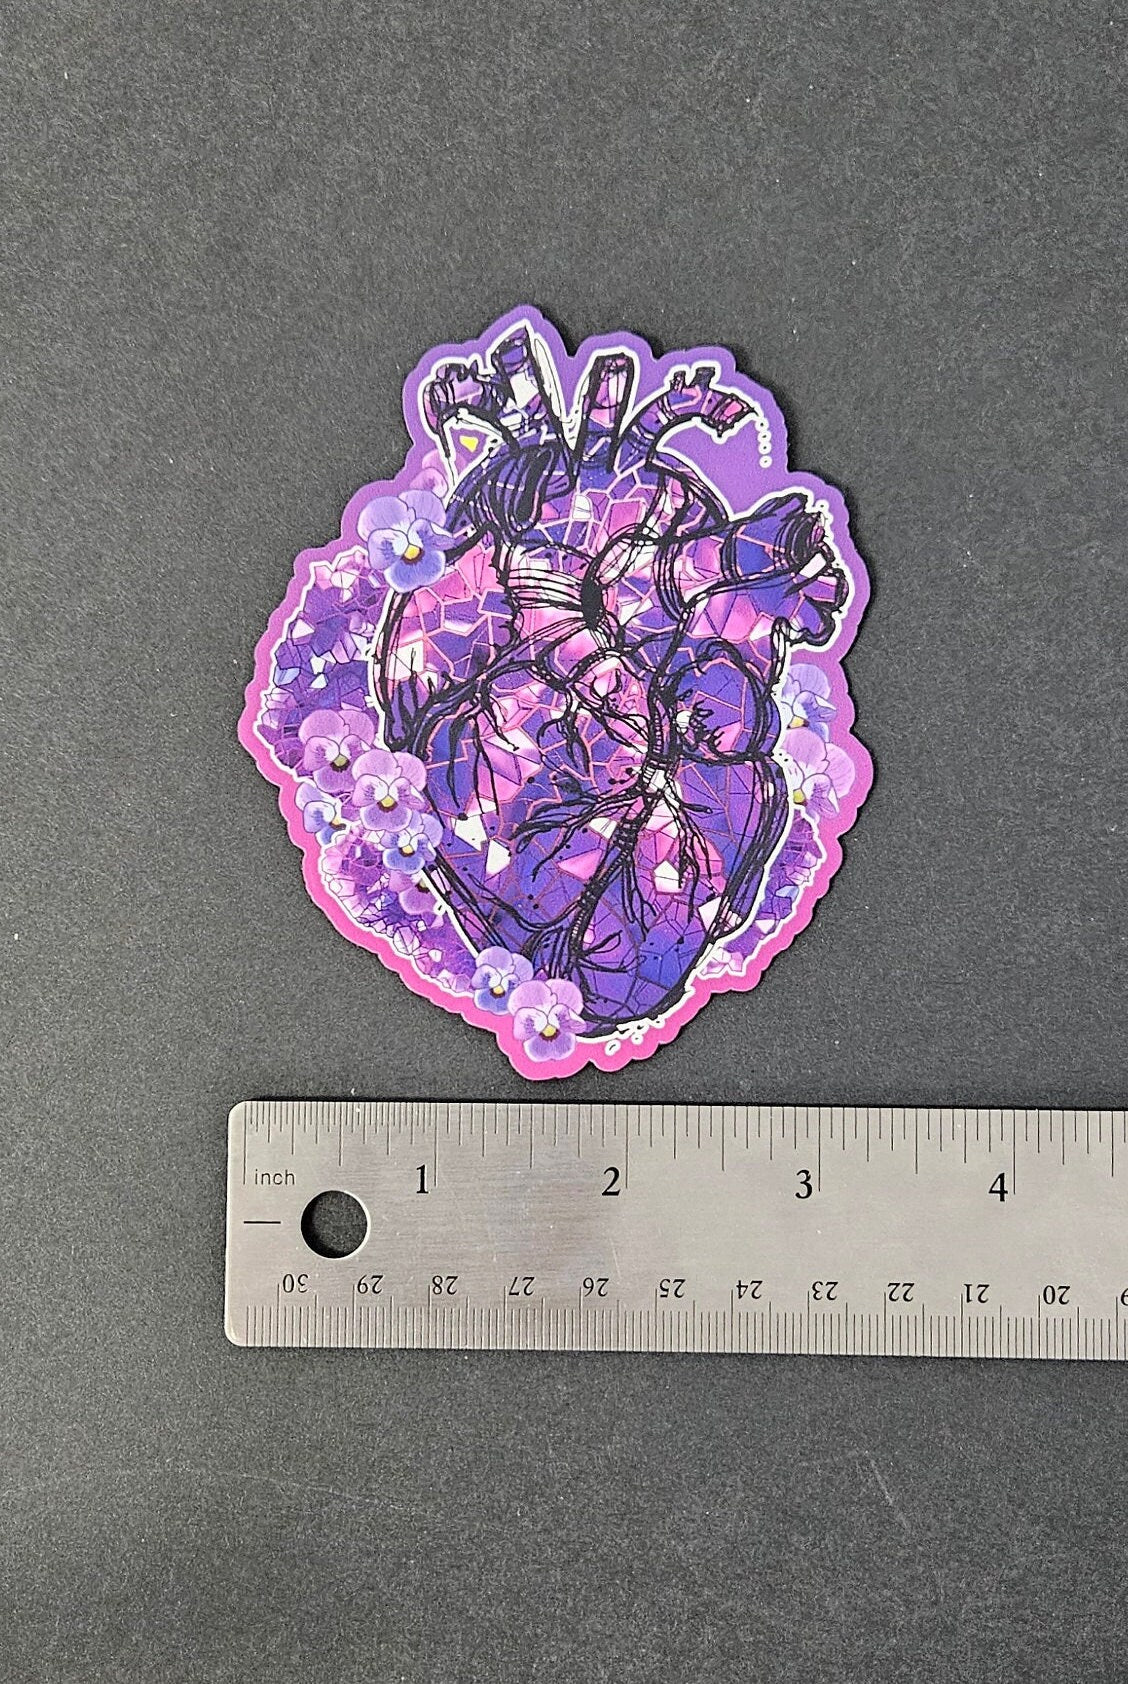 MAGNET: February Amethyst Heart and Violet Flowers , Purple Amethyst Crystal Magnet , Purple Crystal Magnet , Purple Crystal